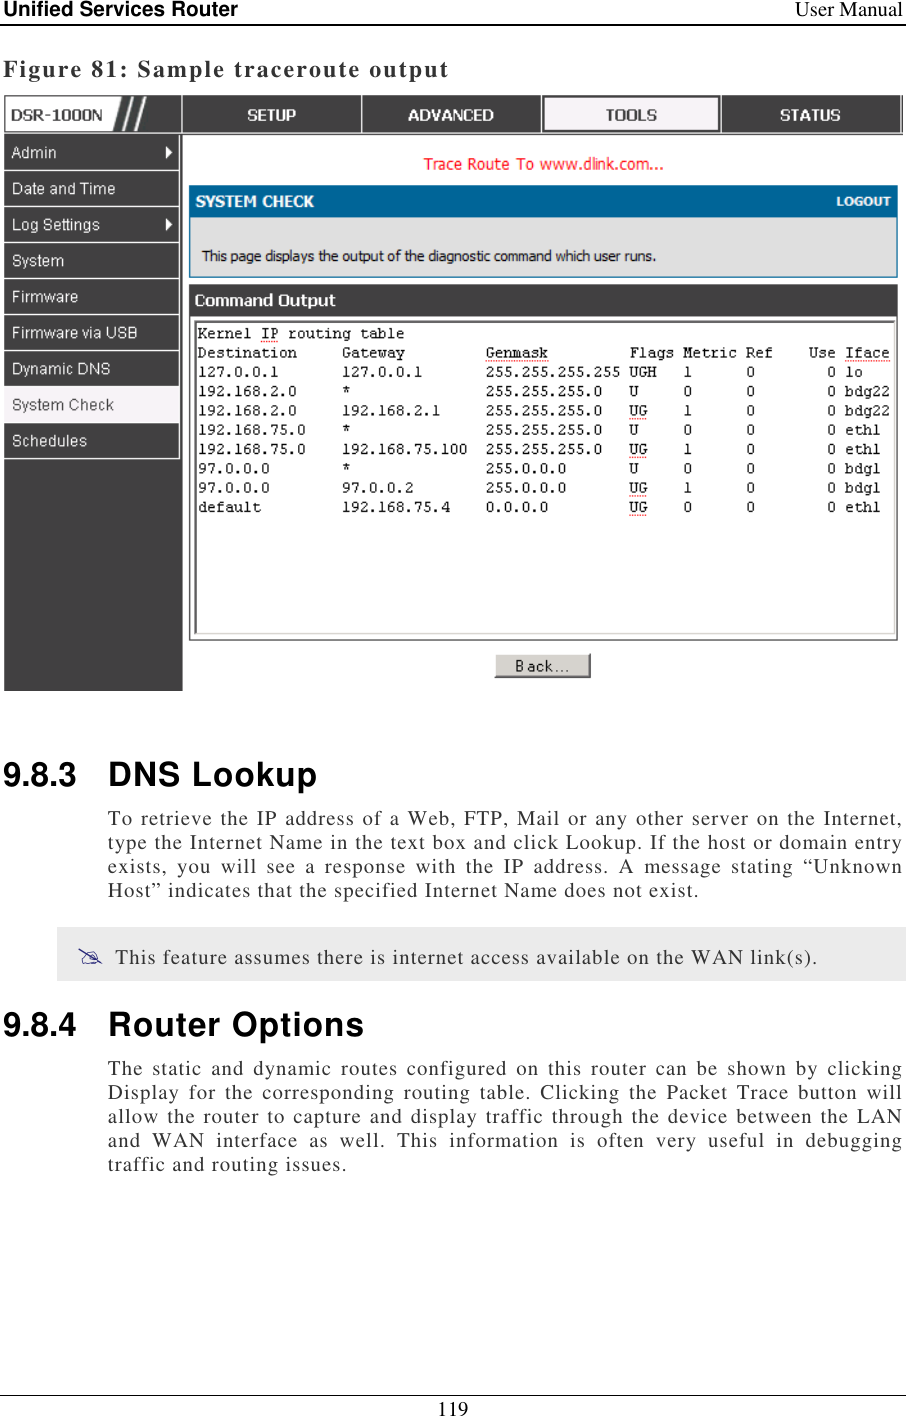 Unified Services Router    User Manual 119  Figure 81: Sample traceroute output   9.8.3  DNS Lookup To retrieve the IP address of a Web, FTP, Mail or any other server on the Internet, type the Internet Name in the text box and click Lookup. If the host or domain entry exists,  you  will  see  a  response  with  the  IP  address.  A  message  stating  “Unknown Host” indicates that the specified Internet Name does not exist.  This feature assumes there is internet access available on the WAN link(s). 9.8.4  Router Options The  static  and  dynamic  routes  configured  on  this  router  can  be  shown  by  clicking Display  for  the  corresponding  routing  table.  Clicking  the  Packet  Trace  button  will allow the router to capture and display traffic through the device between the LAN and  WAN  interface  as  well.  This  information  is  often  very  useful  in  debugging traffic and routing issues.  